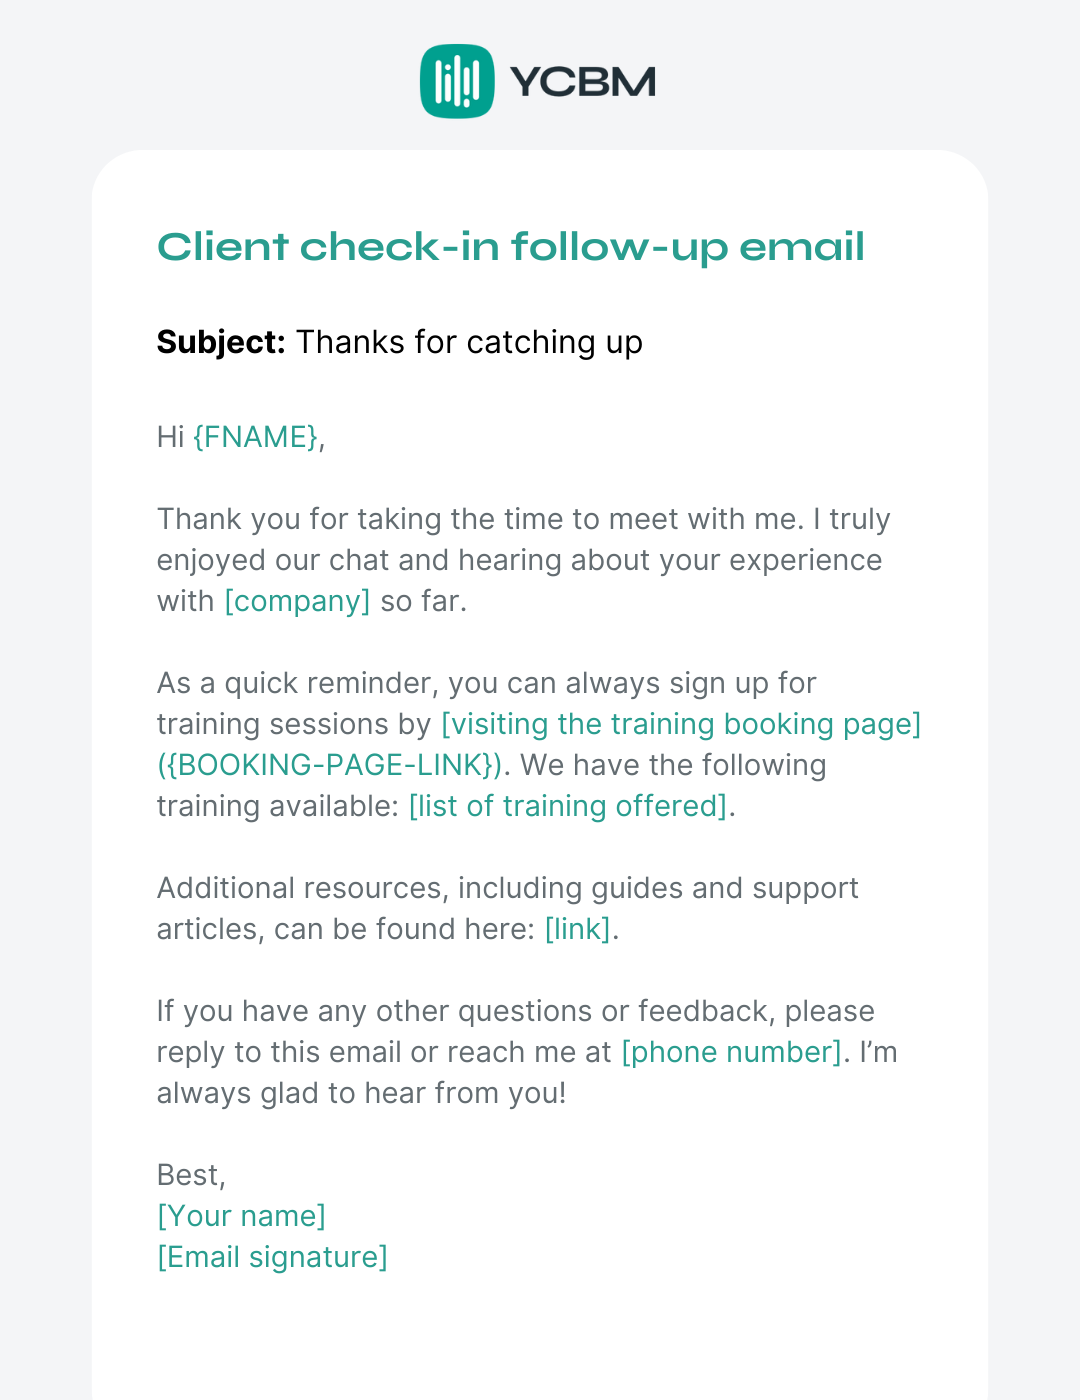 client check-in follow-up email